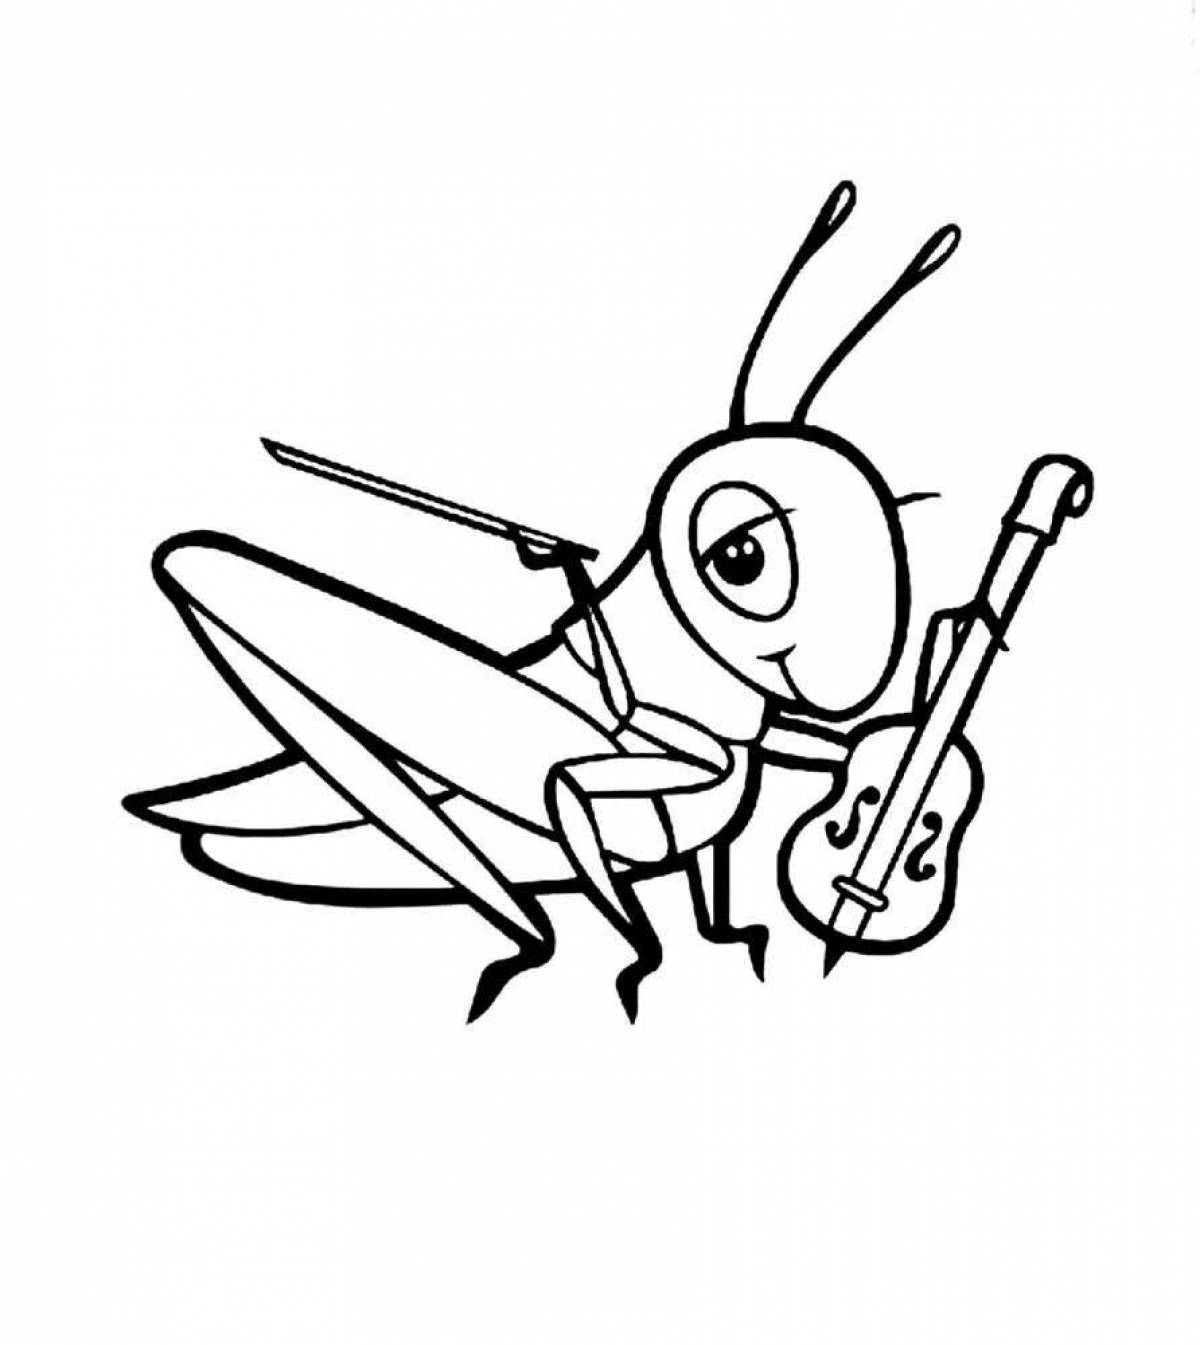 Awesome locust coloring page